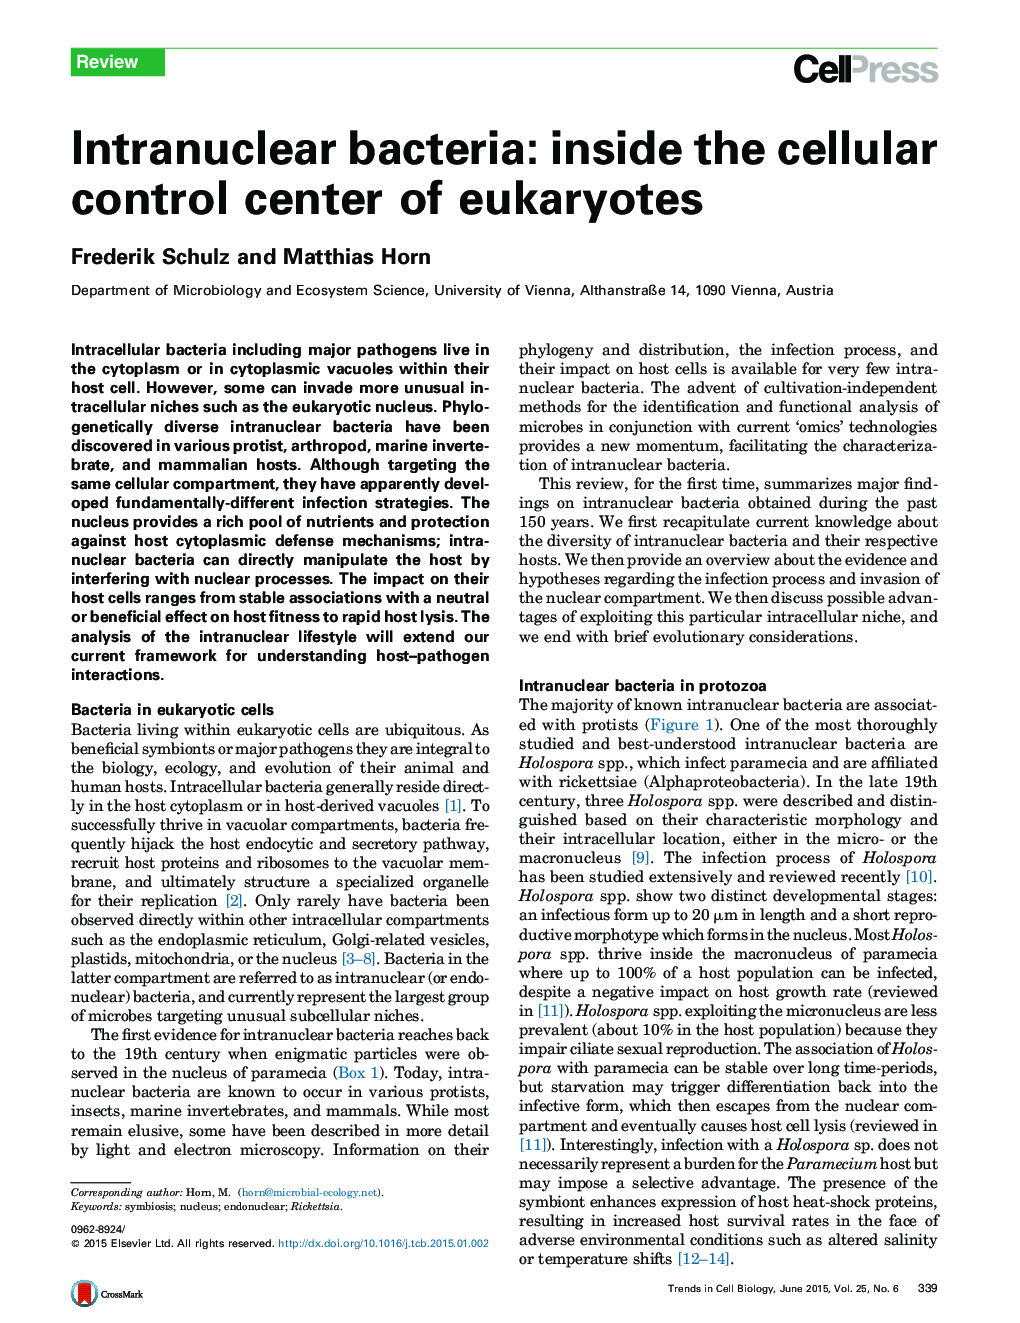 Intranuclear bacteria: inside the cellular control center of eukaryotes